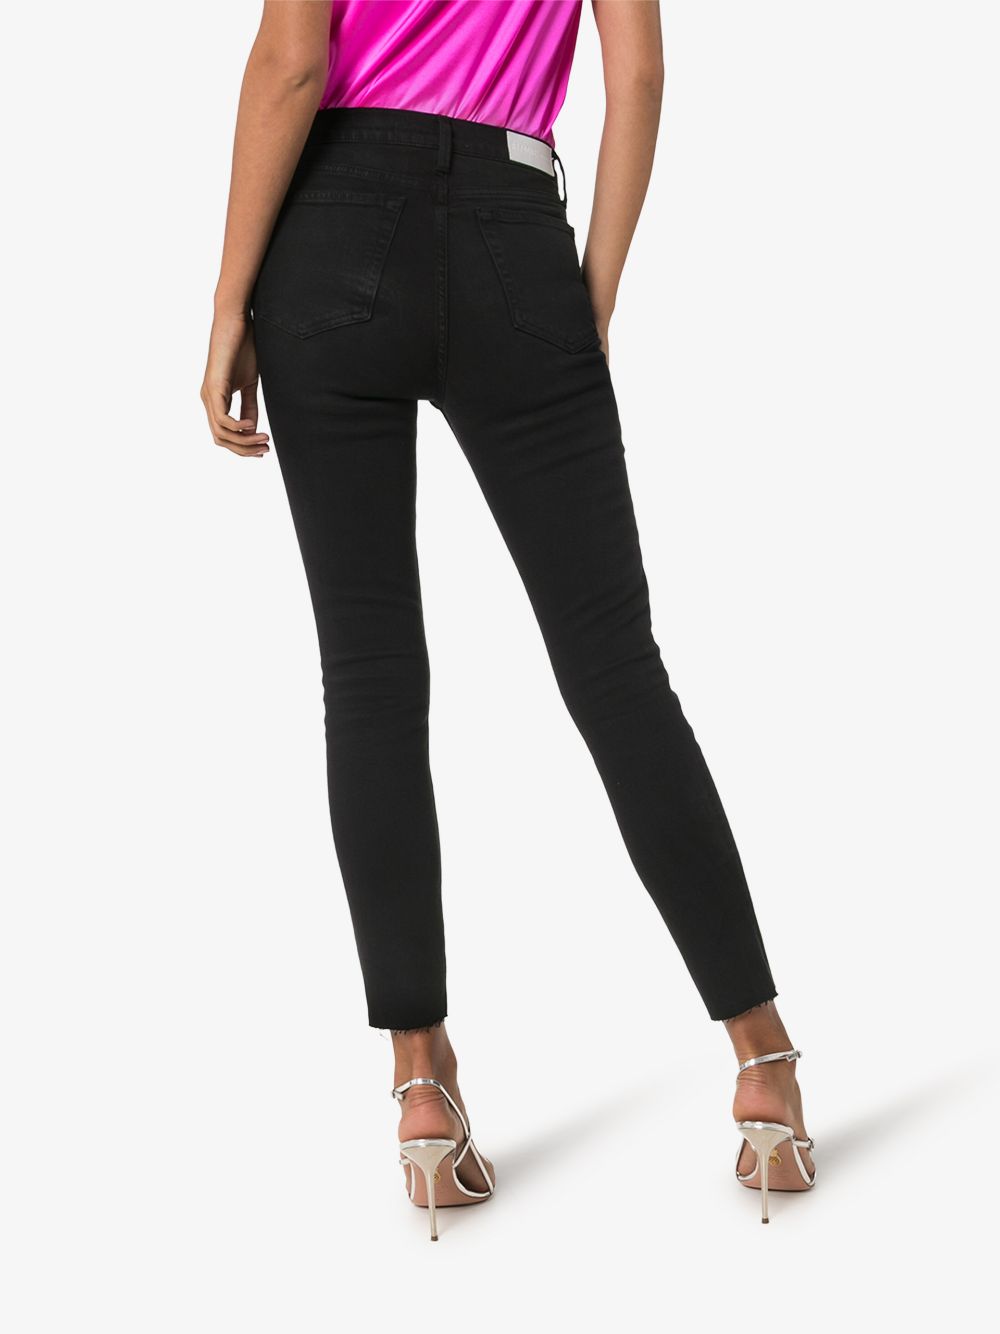 REDONE-90s High Rise Ankle Crop-189 3WHRAC BLACK